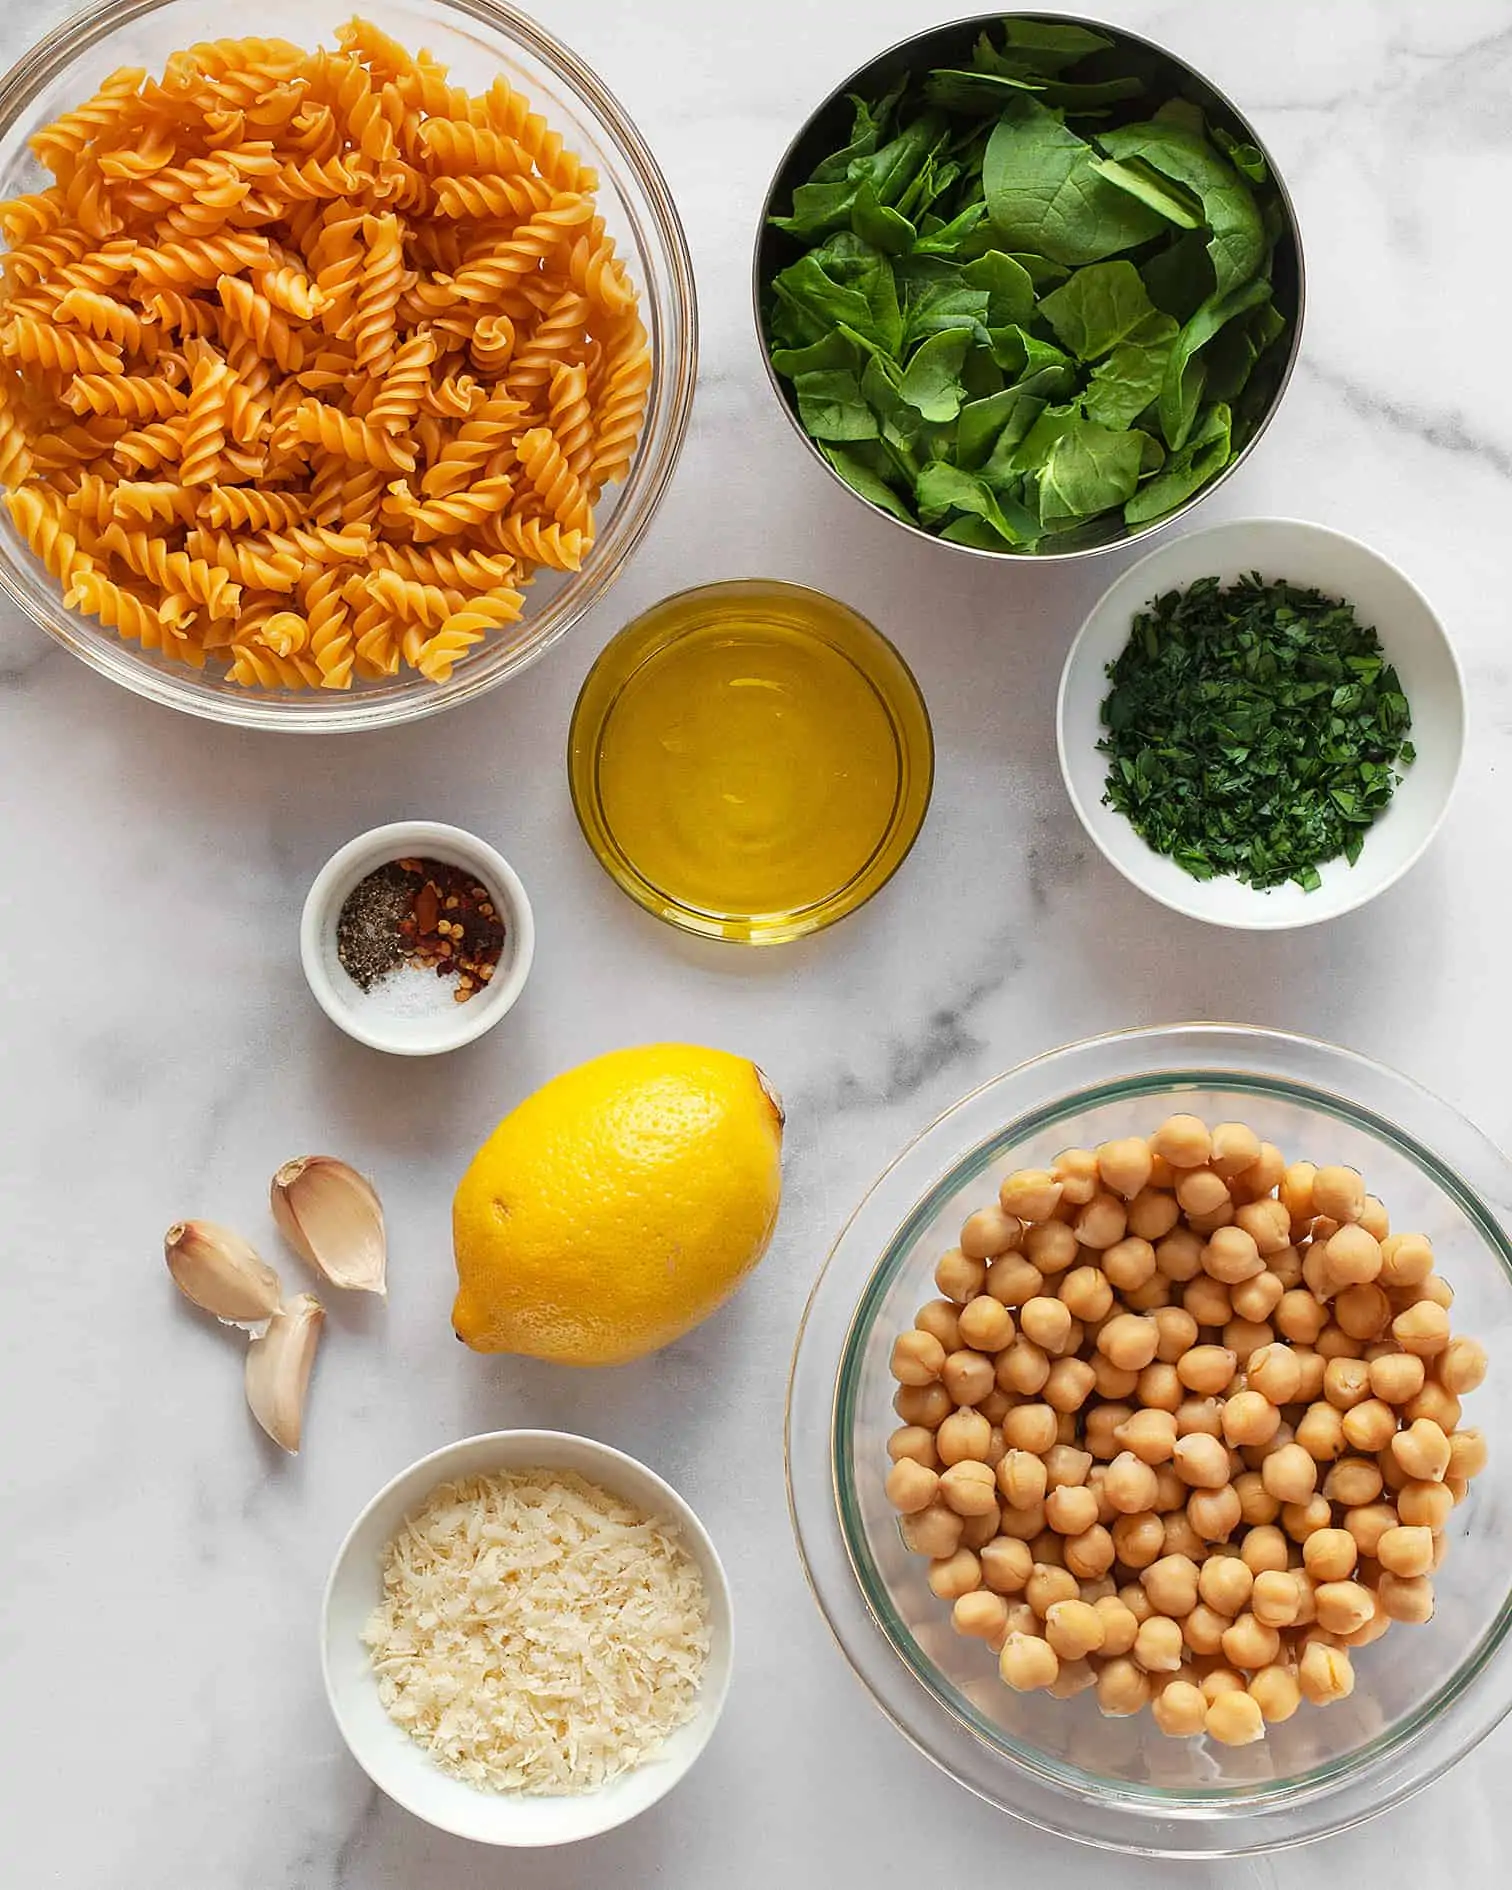 Ingredients including rotini pasta, lemon, spinach, garlic, chickpeas and cheese